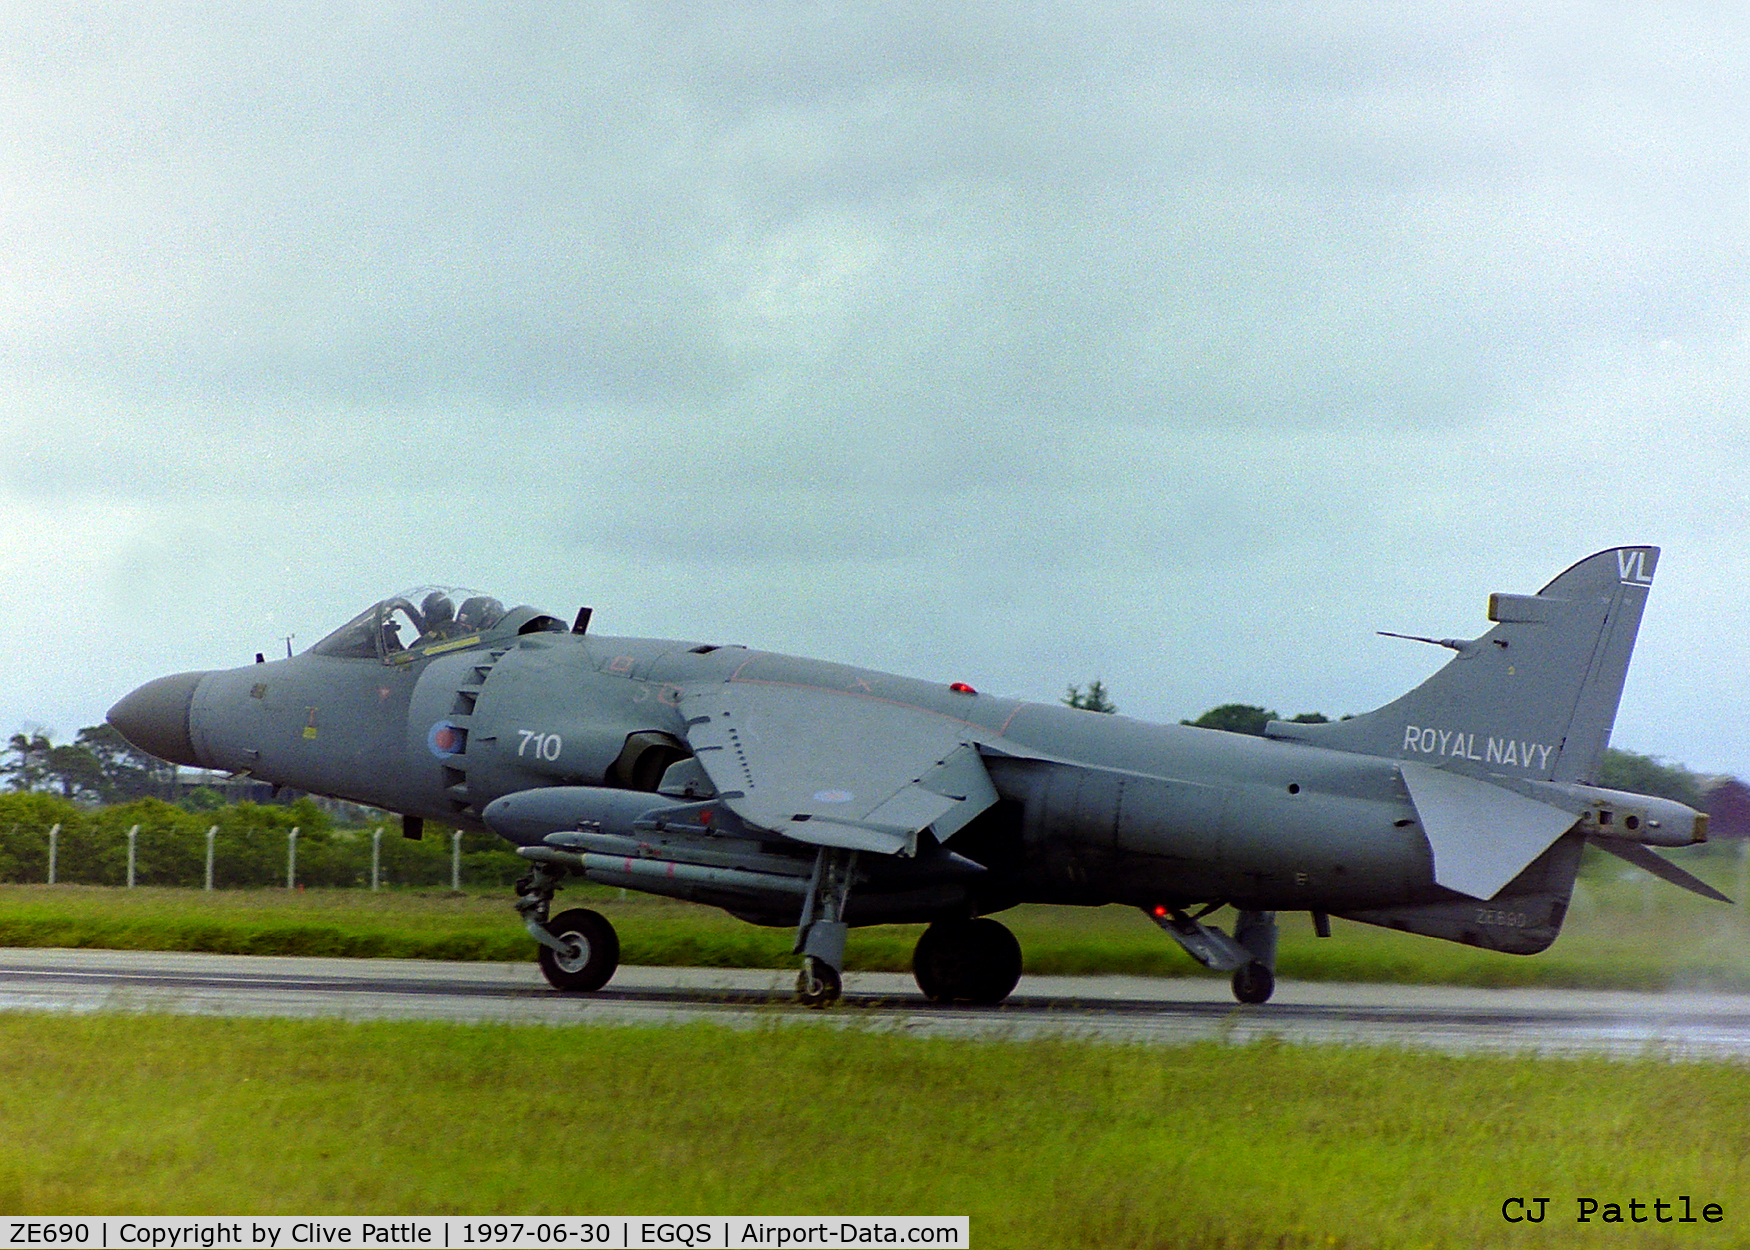 ZE690, British Aerospace Sea Harrier F/A.2 C/N B49/P12, Taxying at RAF Lossiemouth (EGQS) during a TLT (Tactical Leaders Training Course) whilst serving with 899 NAS coded 710-VL